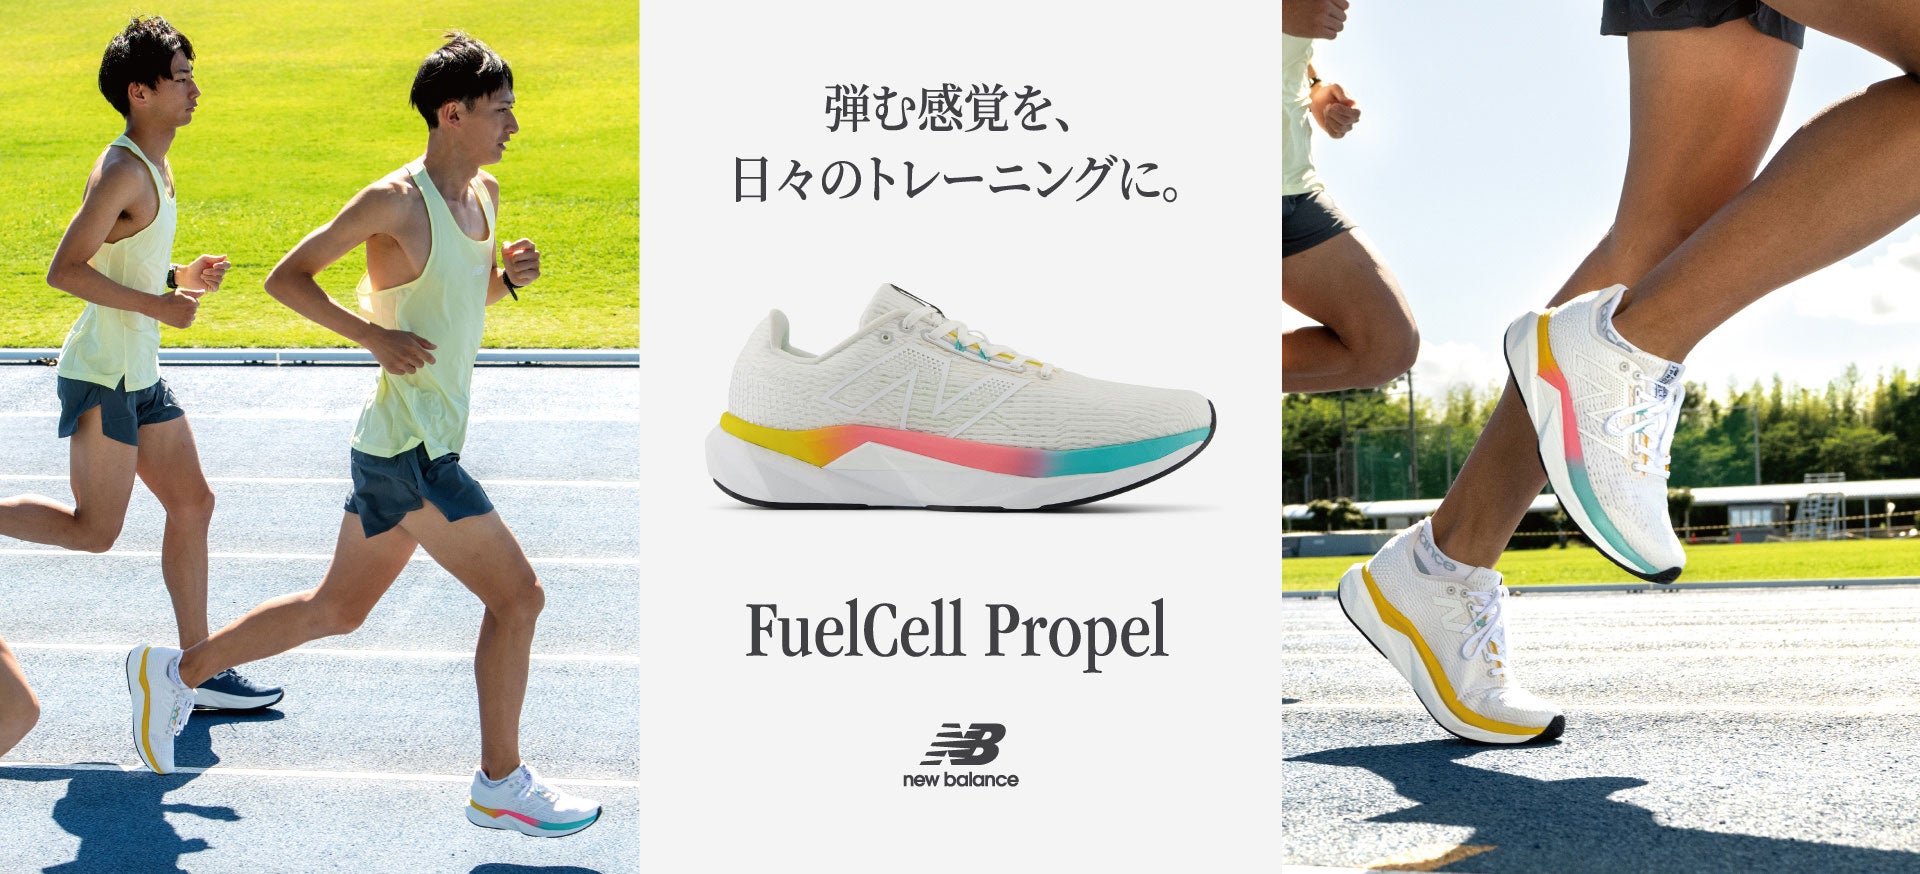 FuelCell Propel